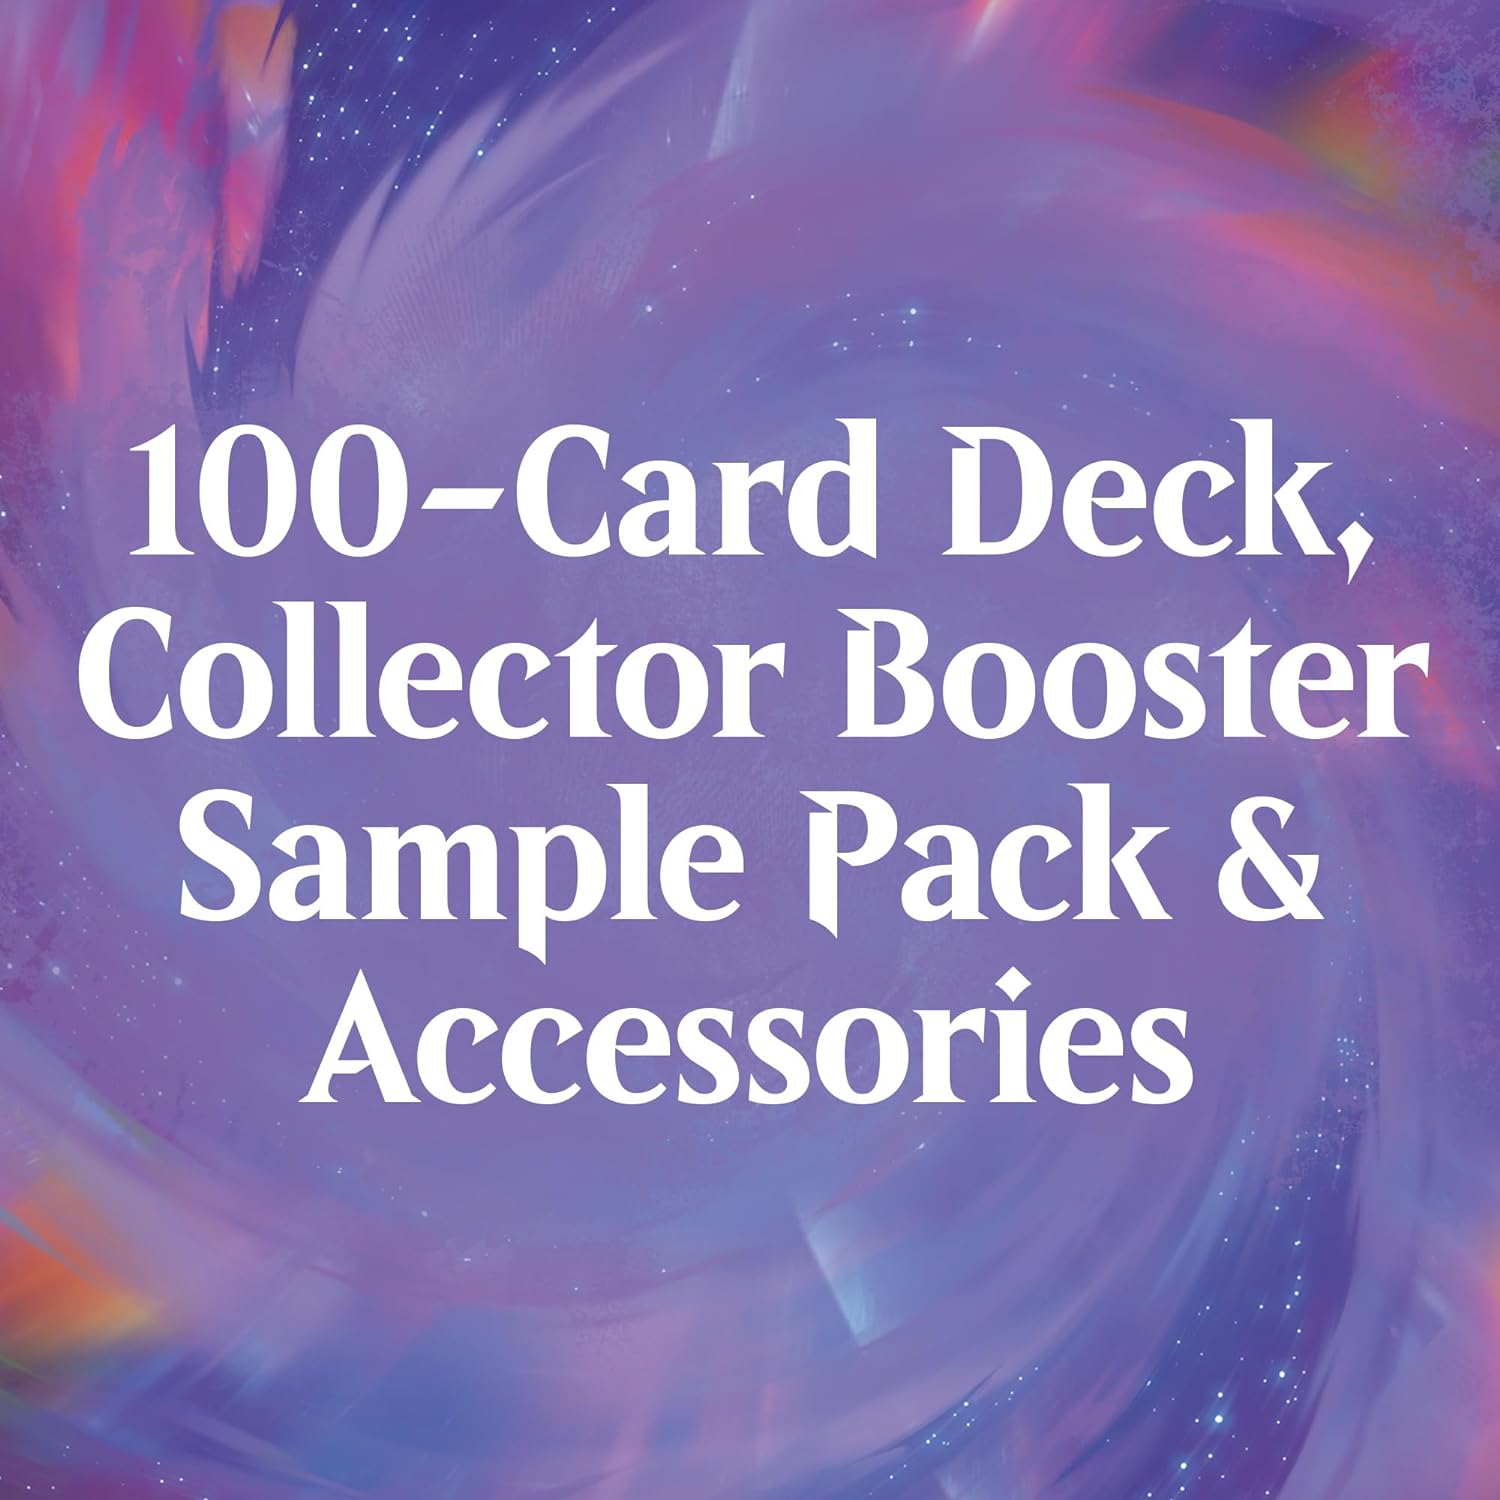 MTG Doctor Who Commander Deck Bundle – Includes All 4 Decks (1 Masters of Evil, 1 Blast from The Past, 1 Timey-Wimey, and 1 Paradox Power Deck Set)